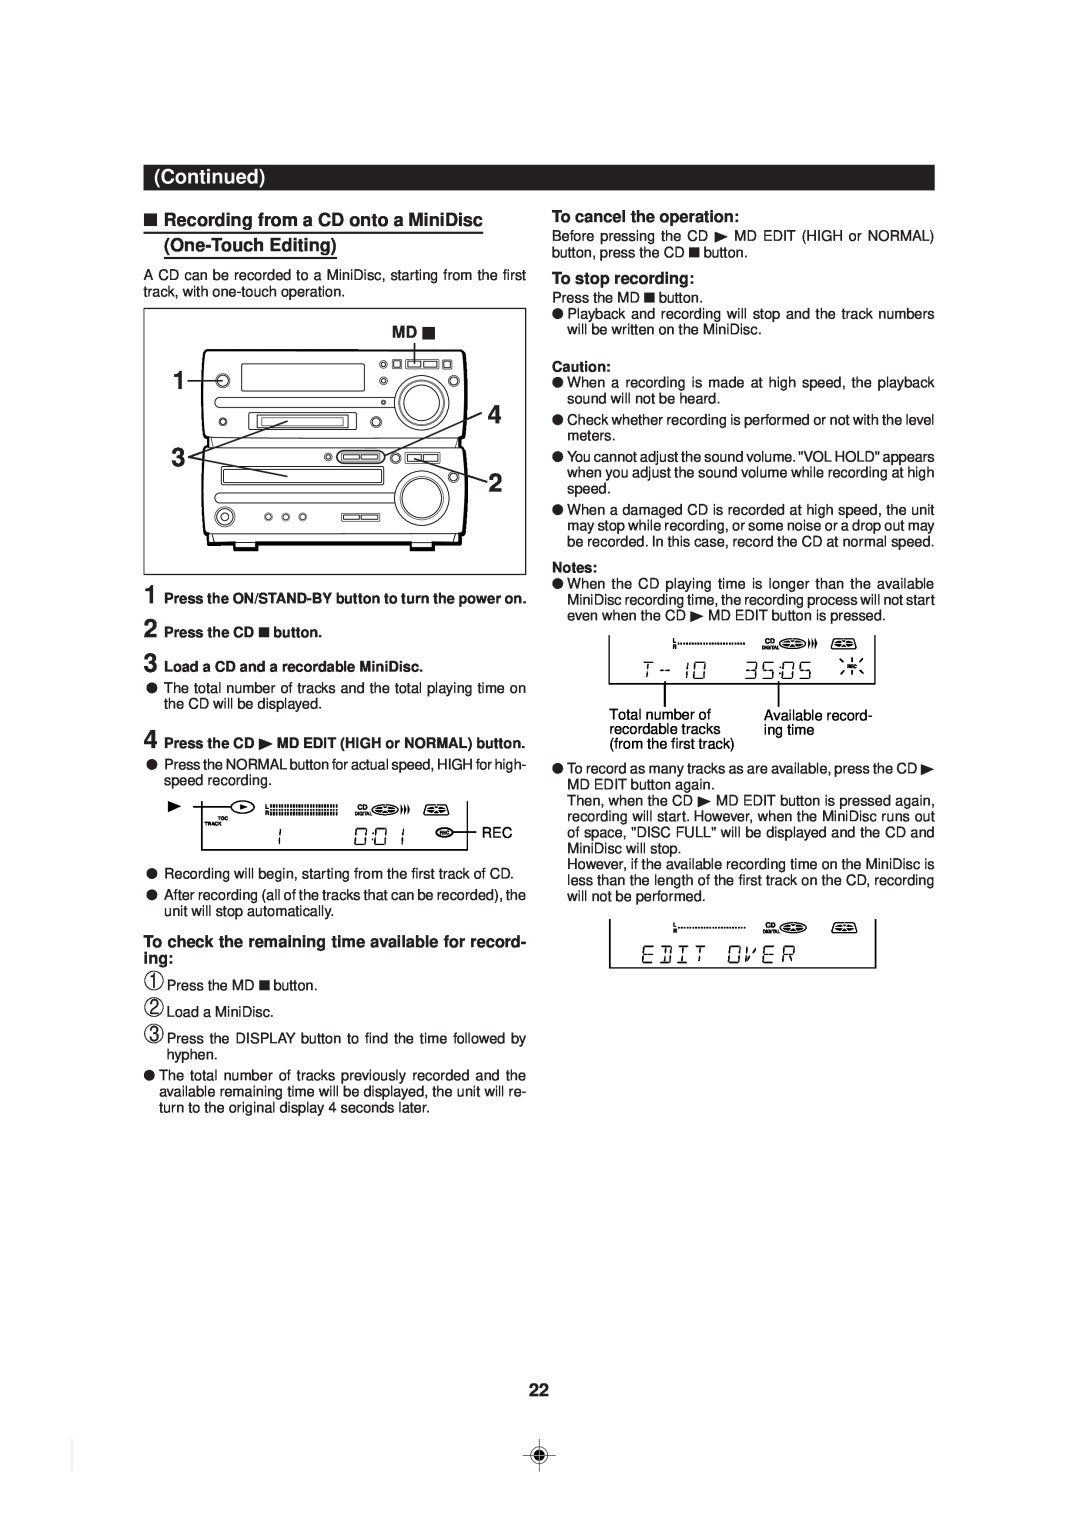 Sharp MD-MX30 MD operation manual Continued, Md H, To cancel the operation, To stop recording 